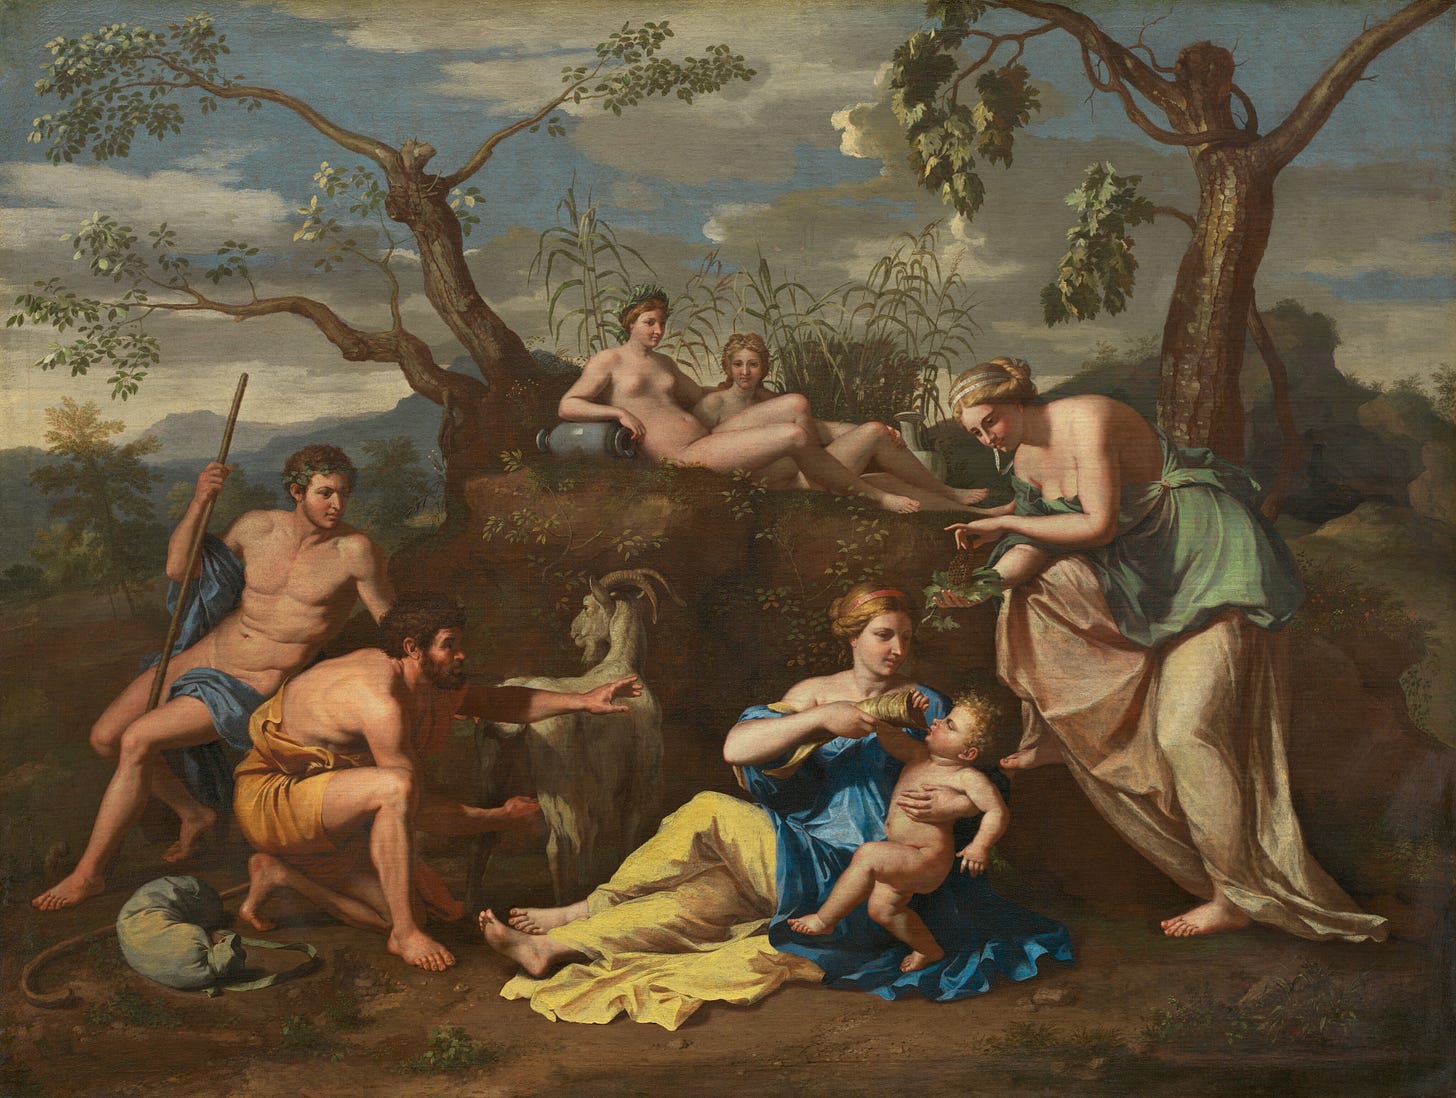 Nymphs Feeding the Child Jupiter, c. 1650 by Follower of Nicolas Poussin